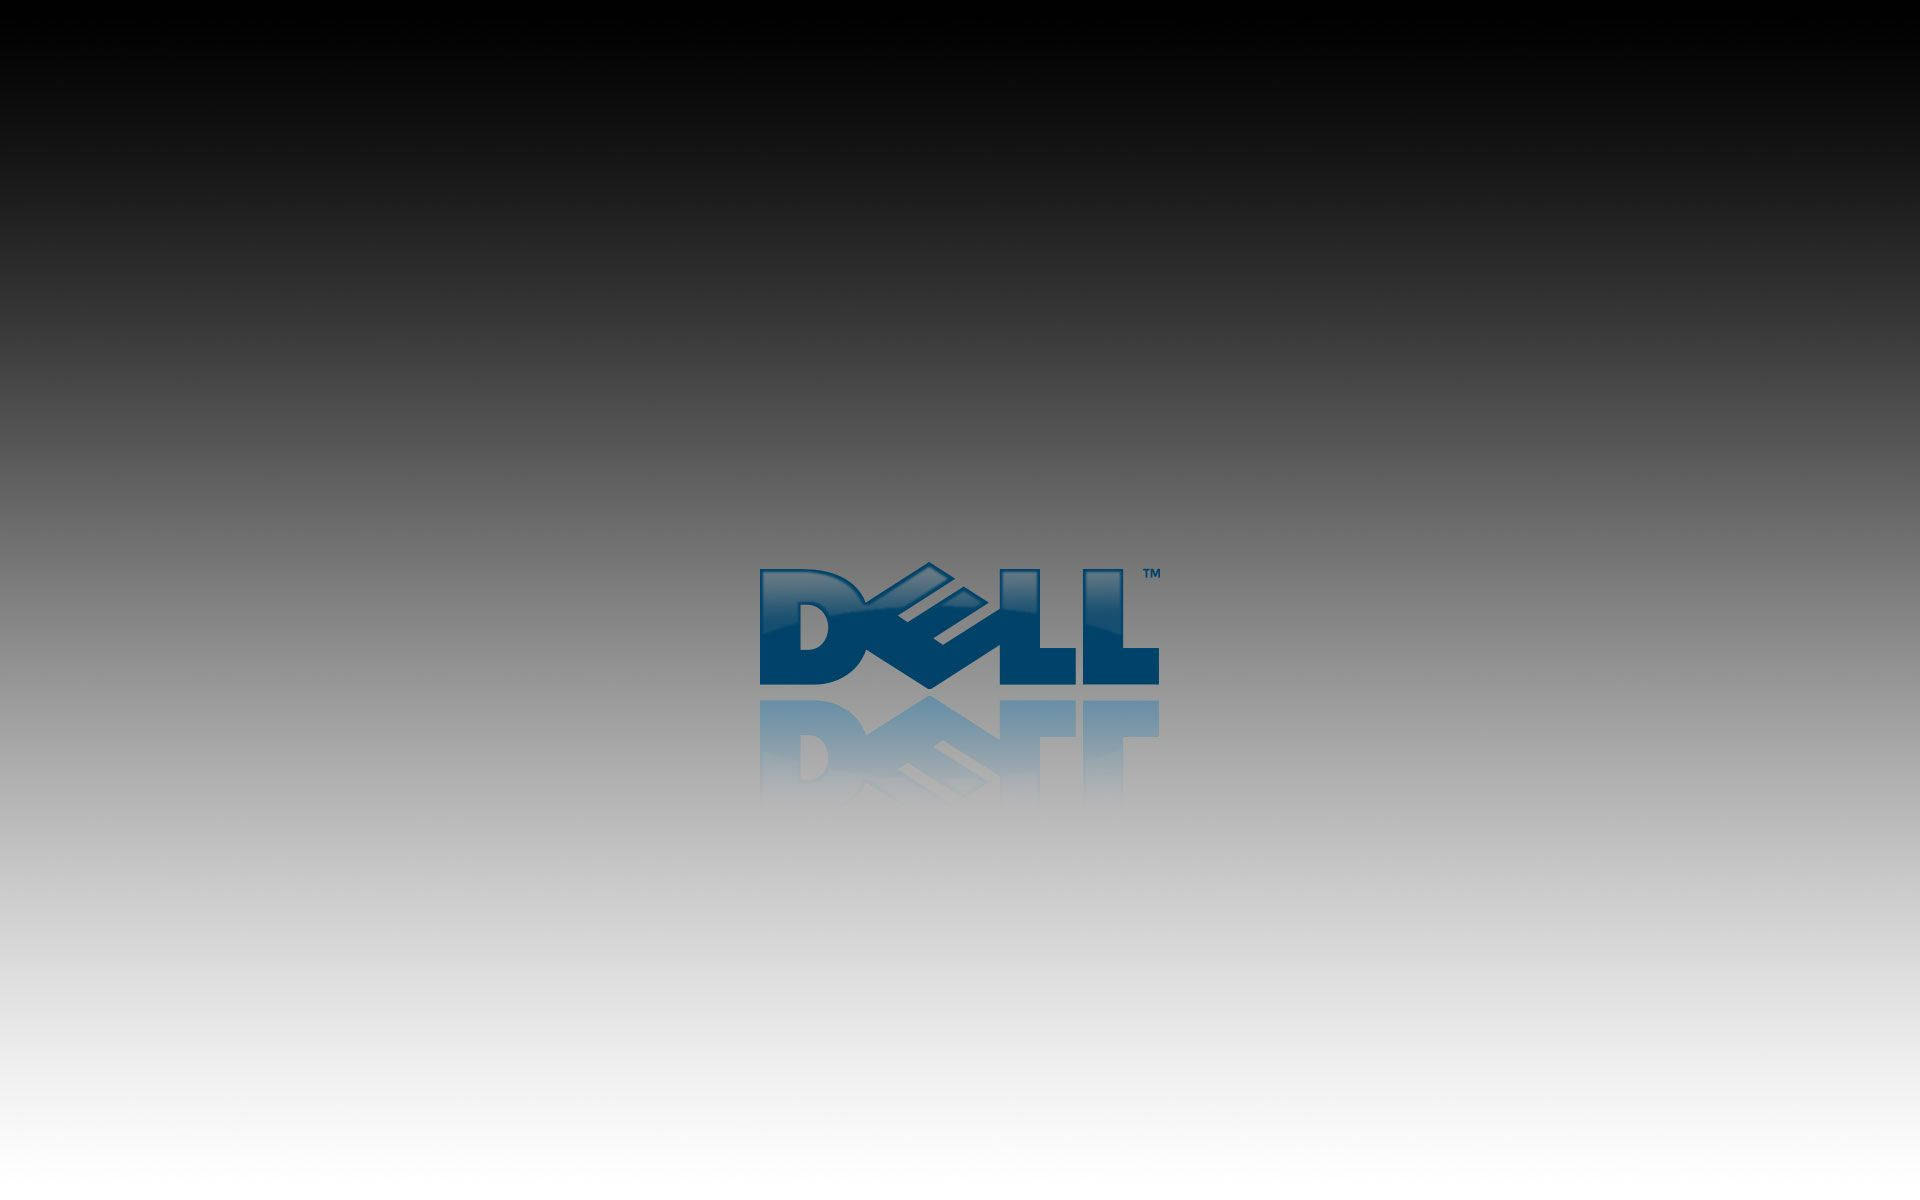 Dell 1920X1200 Wallpaper and Background Image